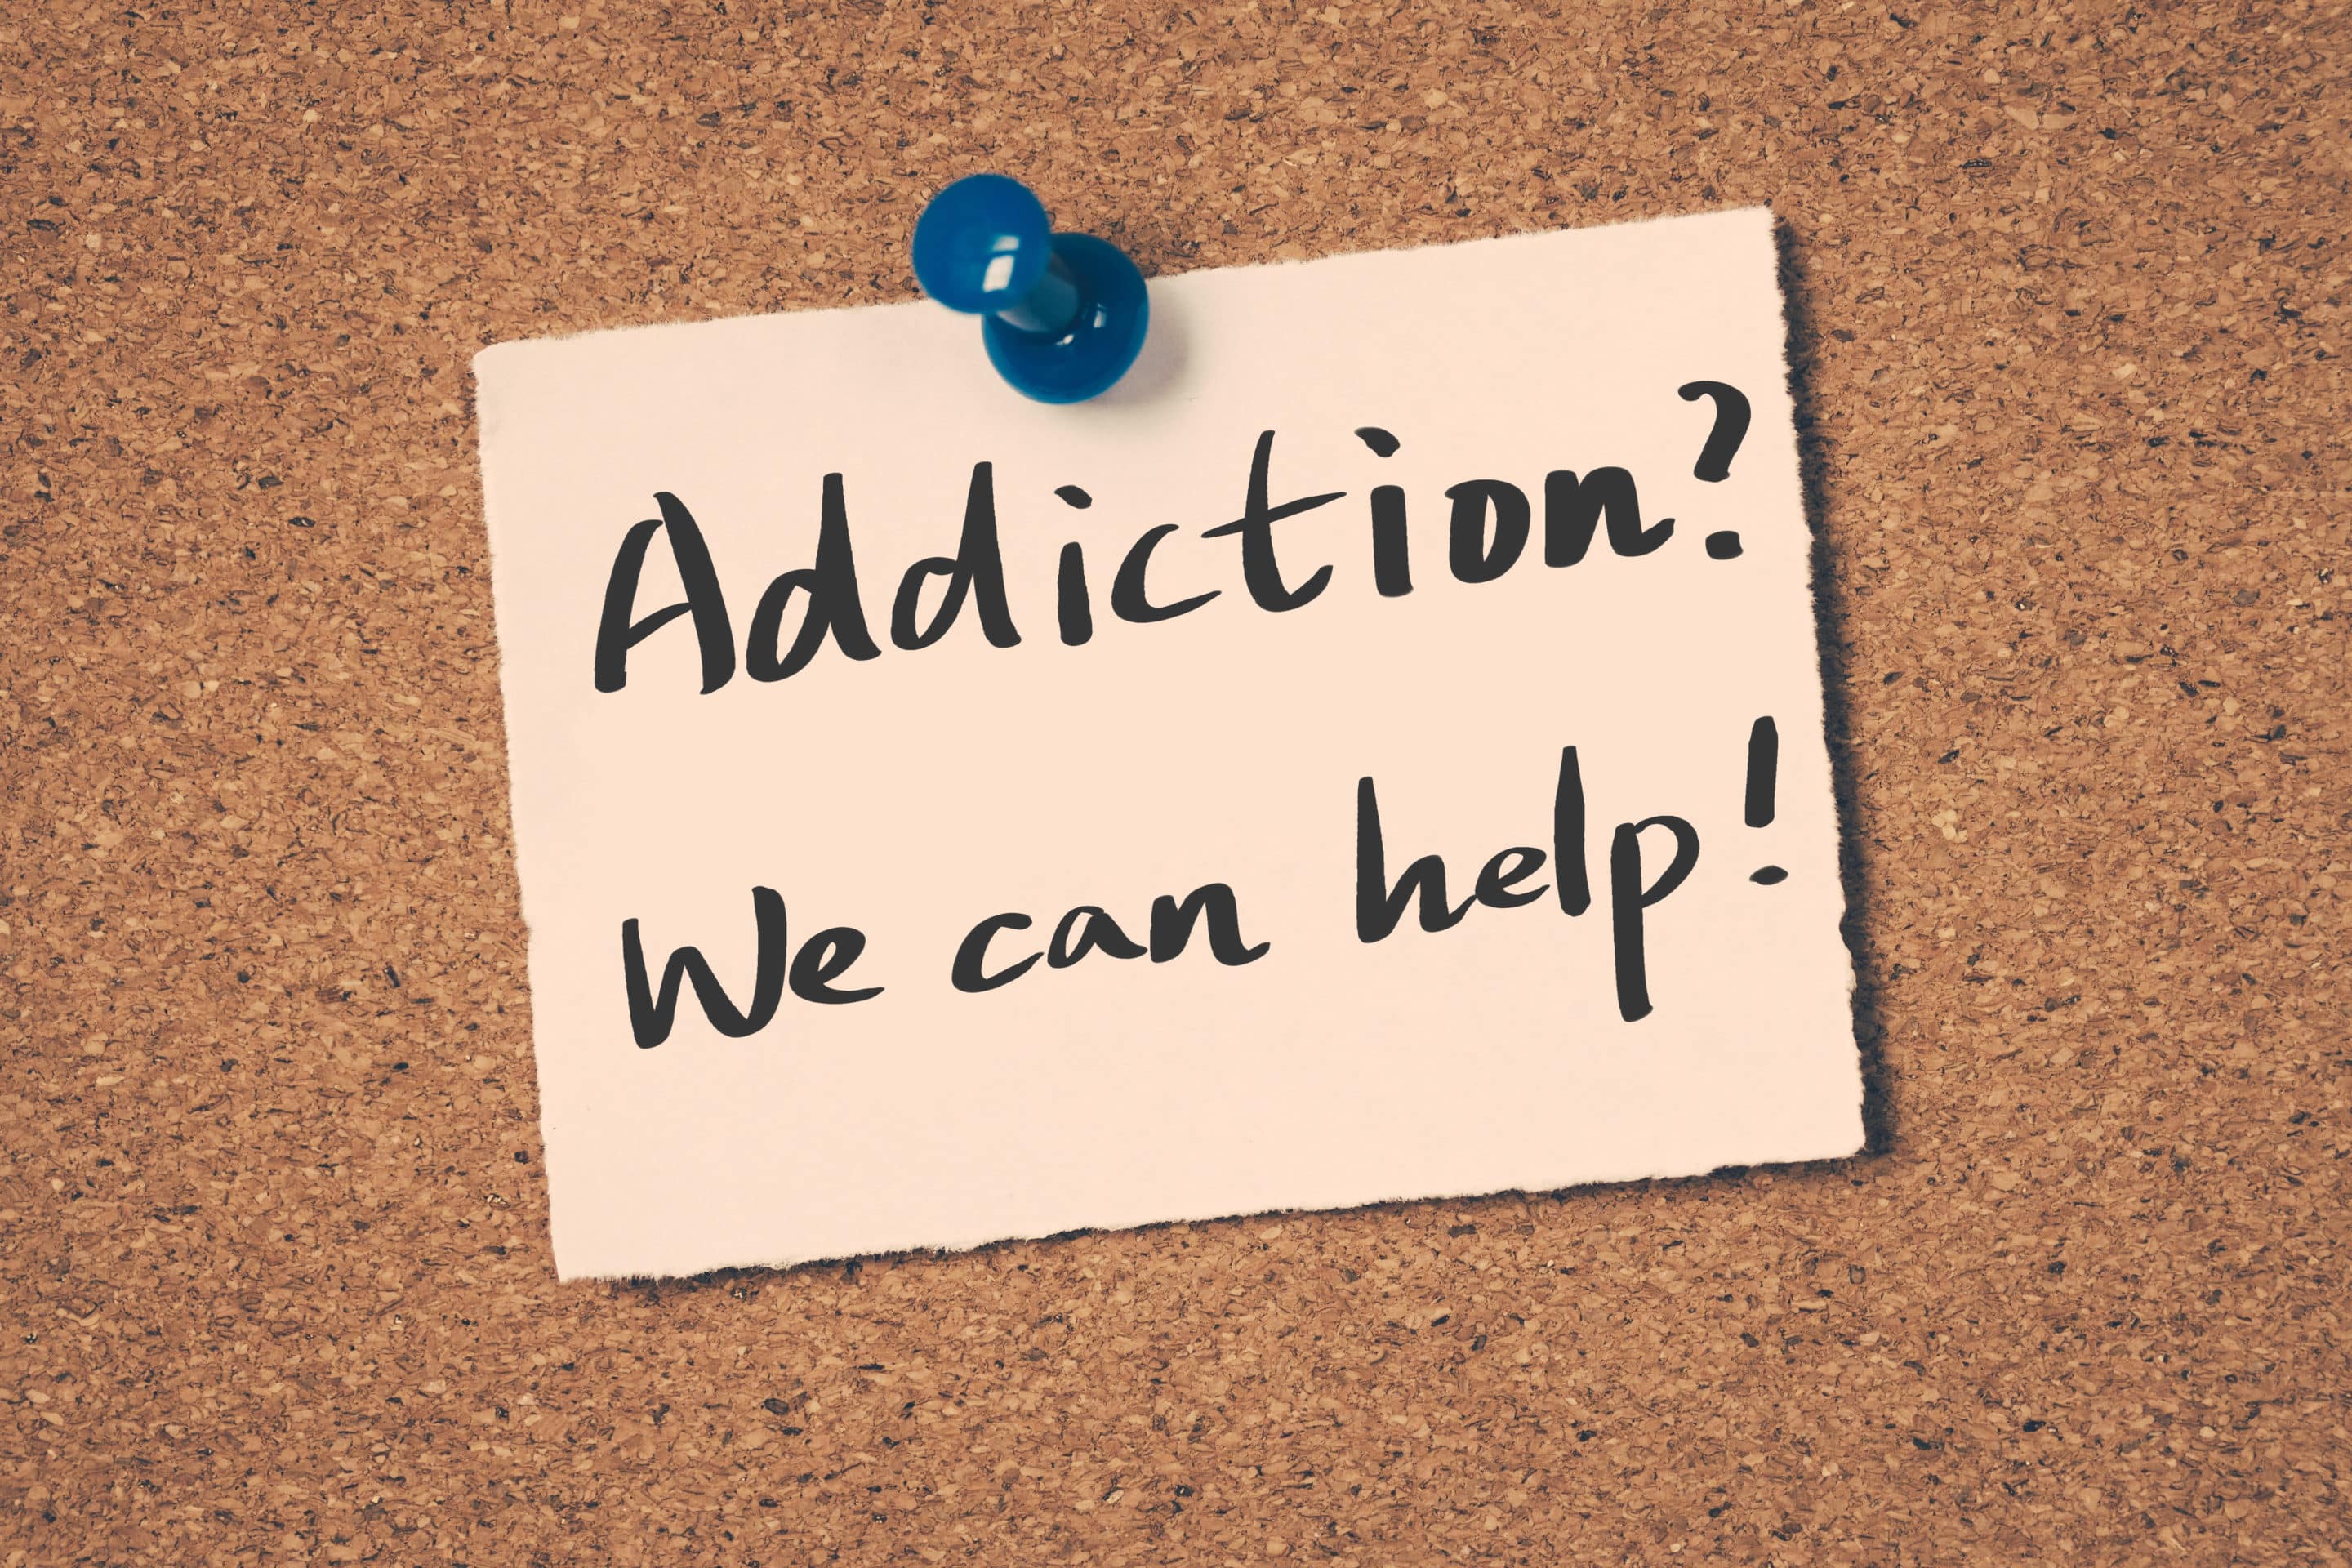 What Is The First Step In Treating Addiction?